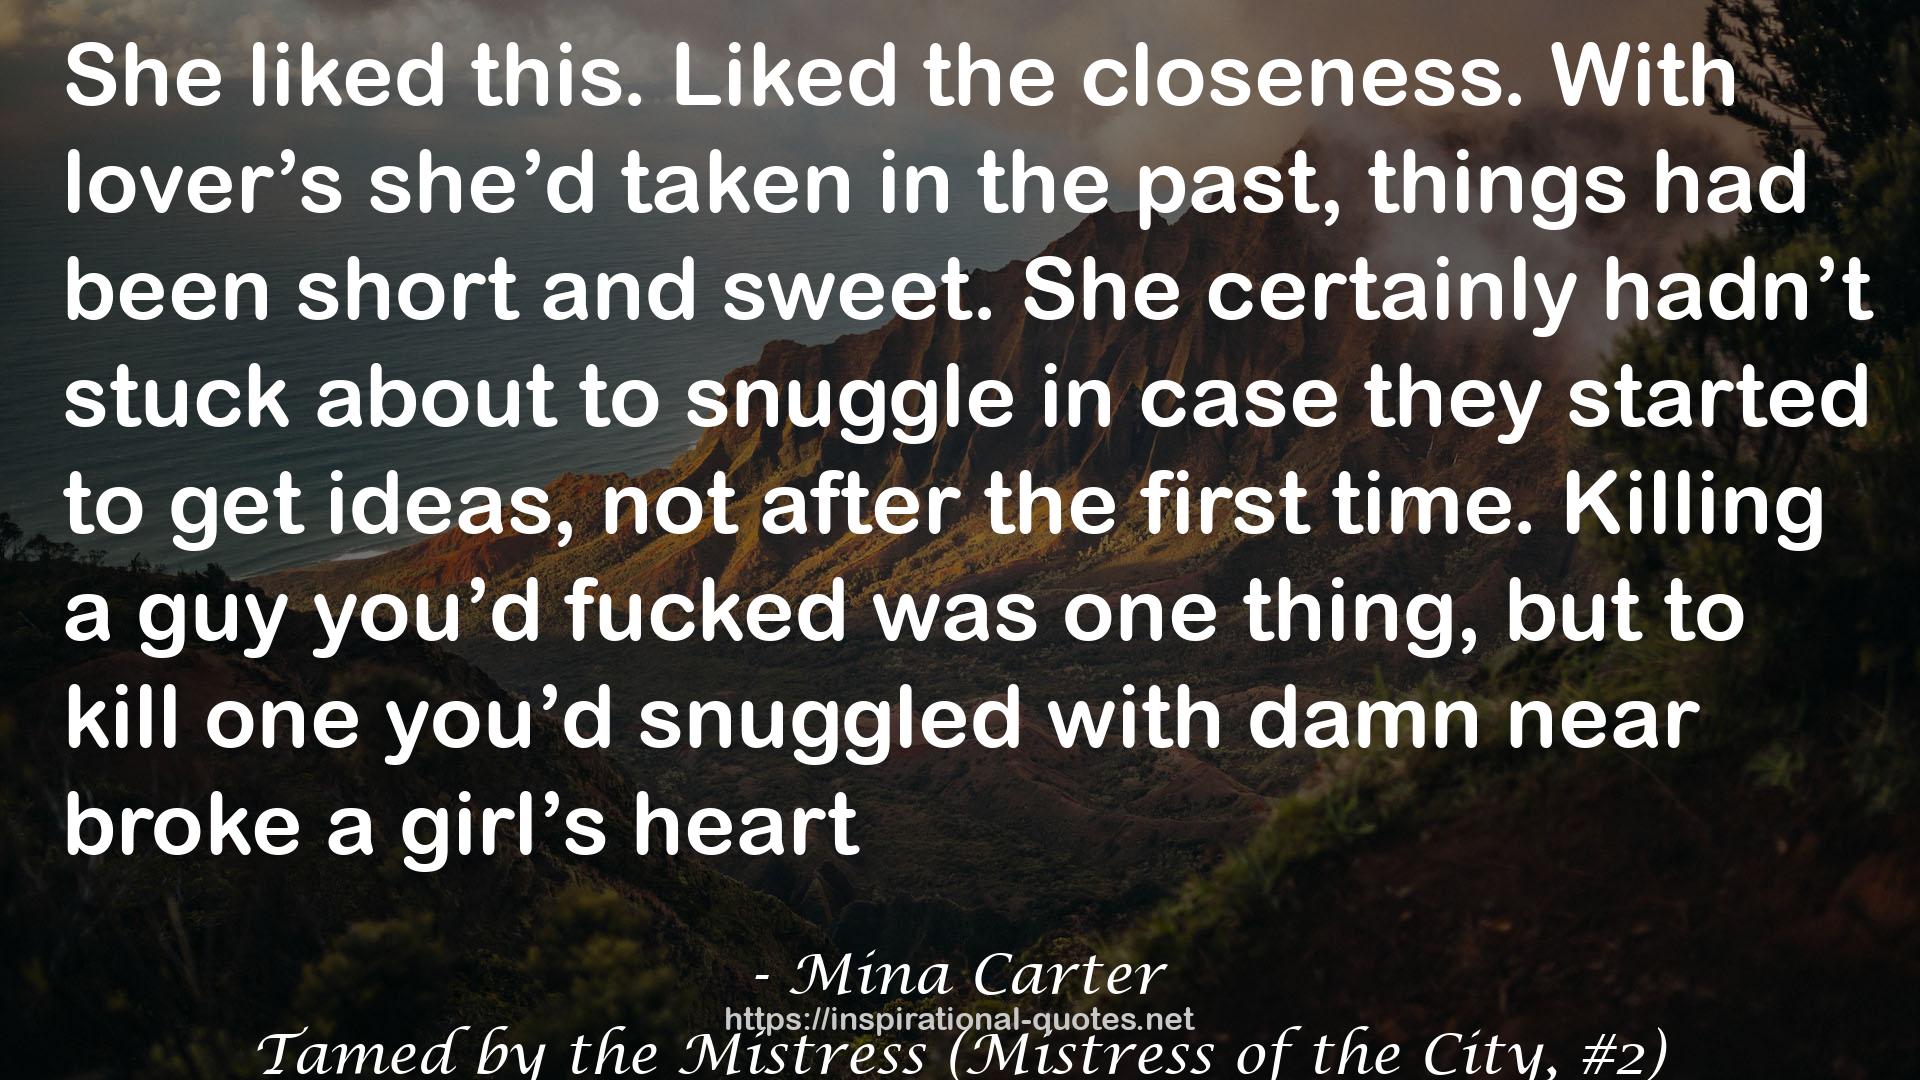 Tamed by the Mistress (Mistress of the City, #2) QUOTES